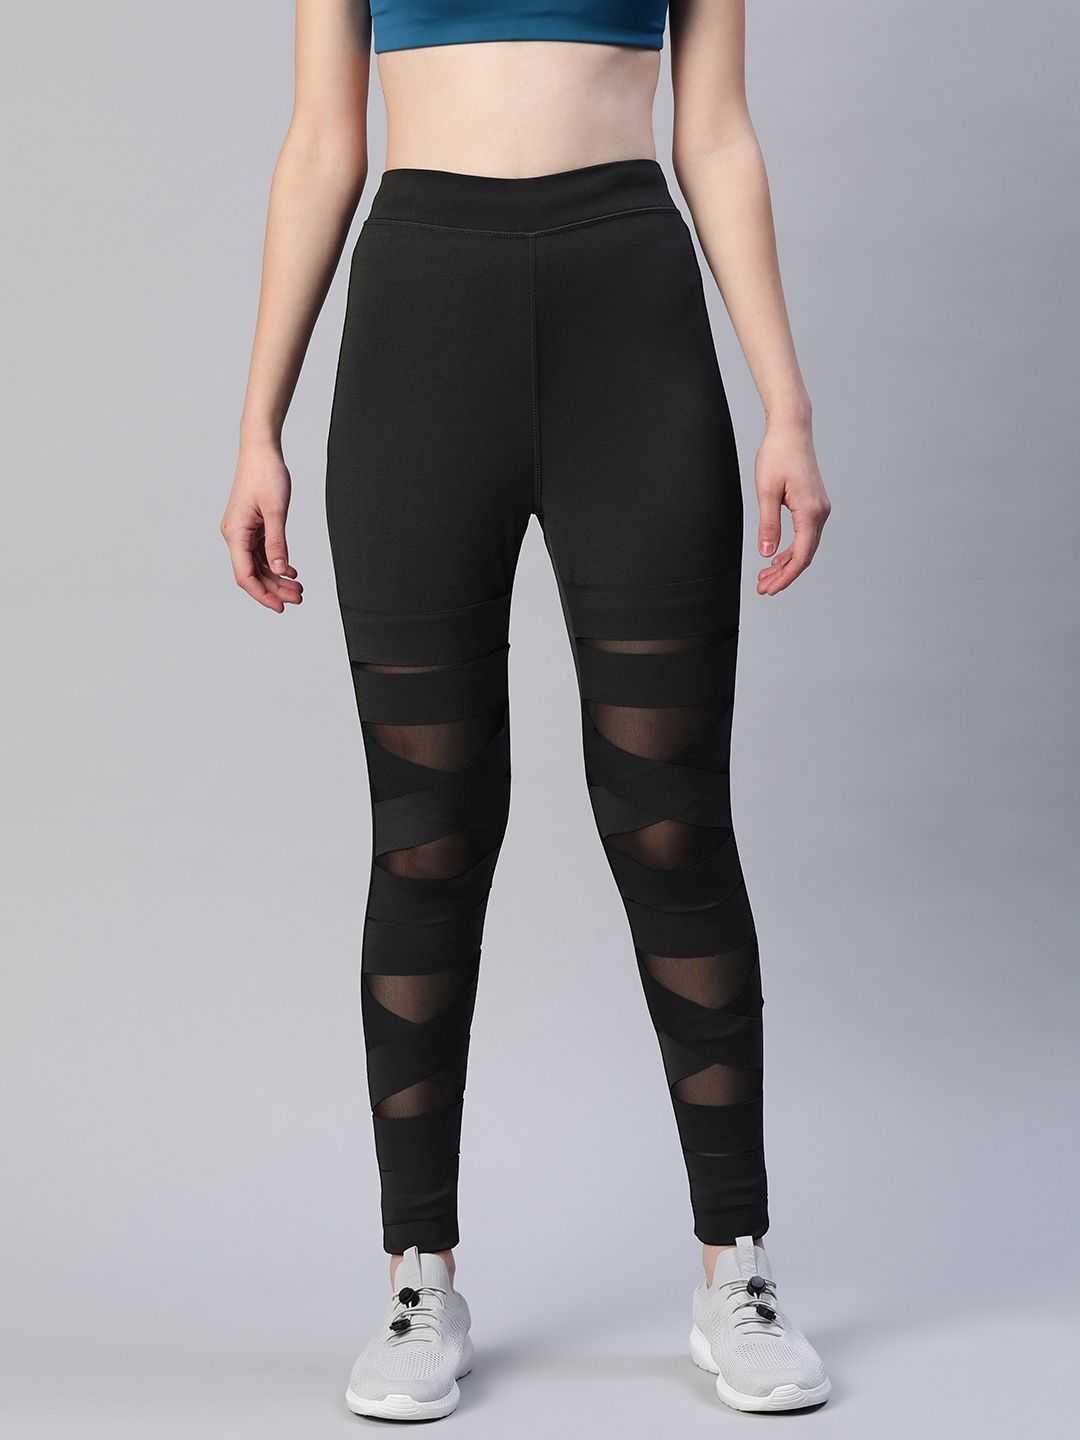 Blinkin Women Black Rapid Dry Tights with Breathable Mesh Panels Price in India